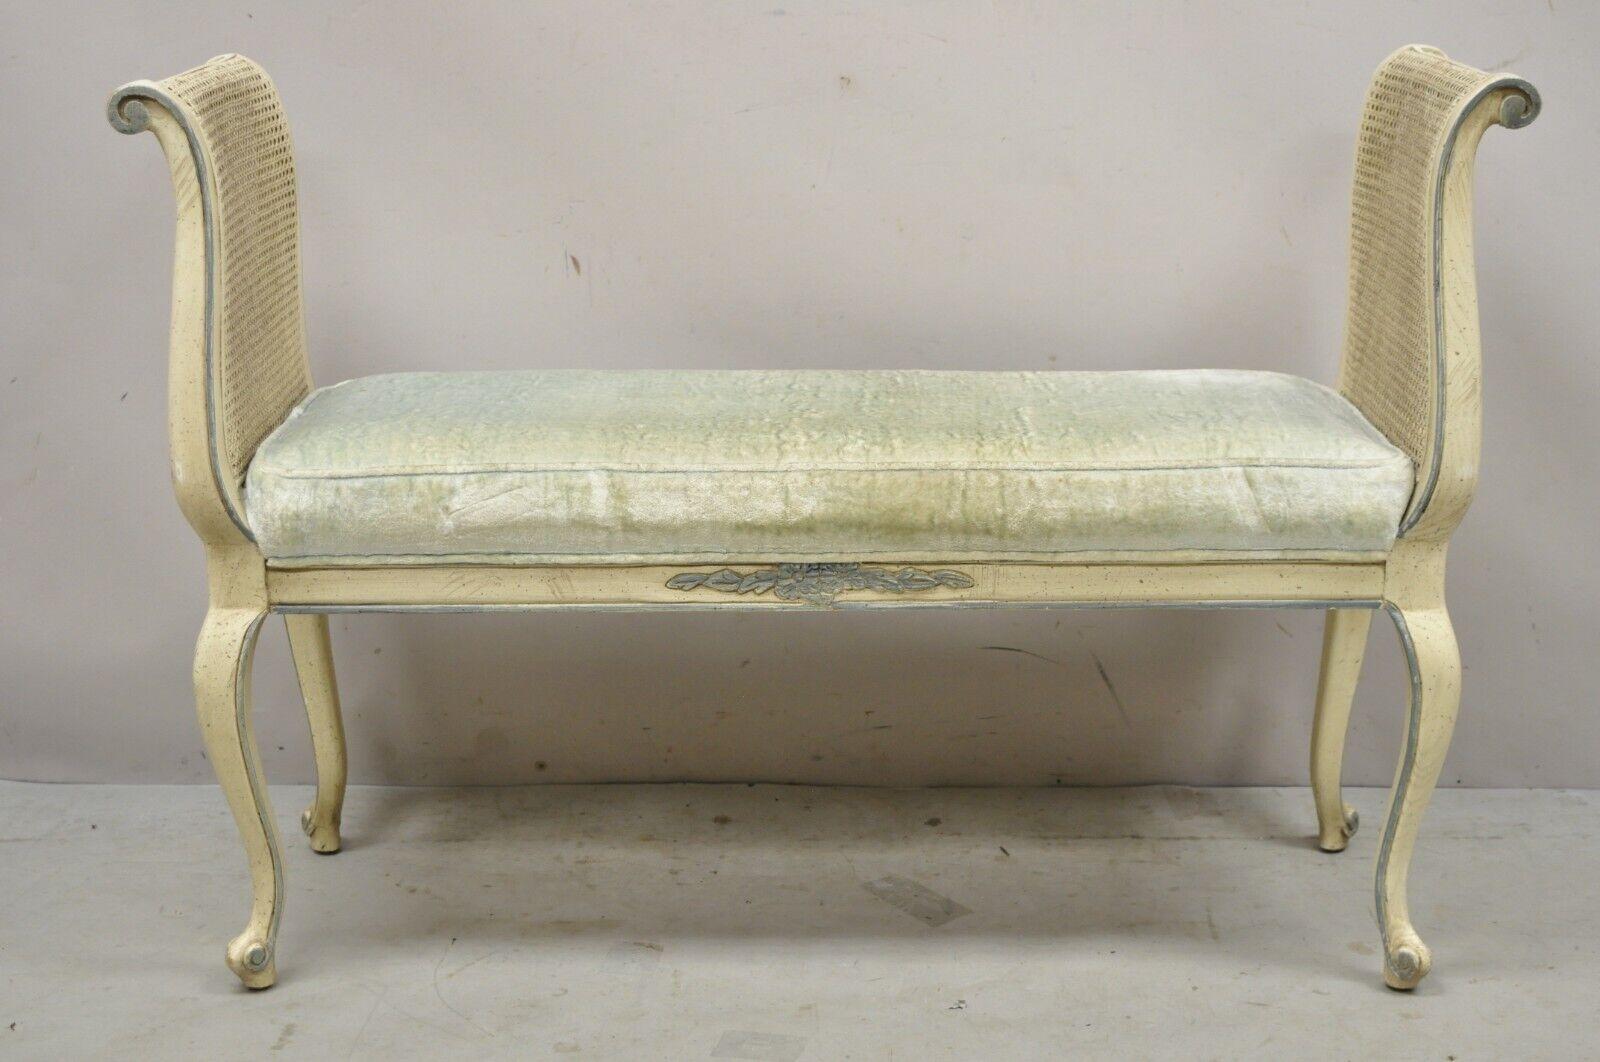 Vintage French Provincial Style Cream Painted Cane Cabriole Leg Window Bench with Arms. Item features cane side panels, cream painted finish, blue upholstery, solid wood frame, cabriole legs, great style and form. Circa Late 20th Century.